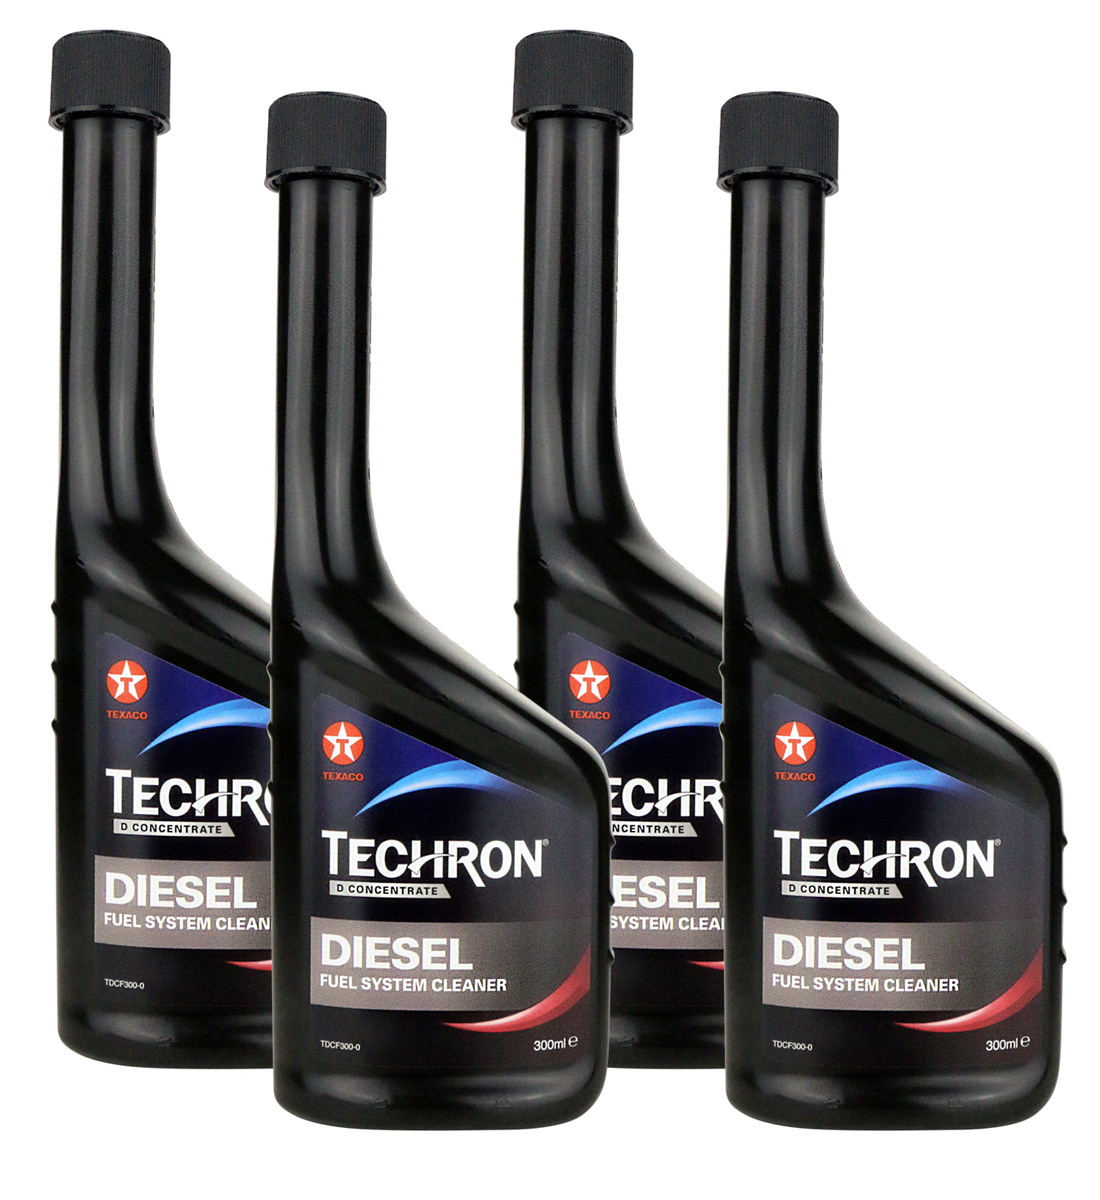 Techron D Concentrate Diesel Fuel Injector System Cleaner - Pack of 4